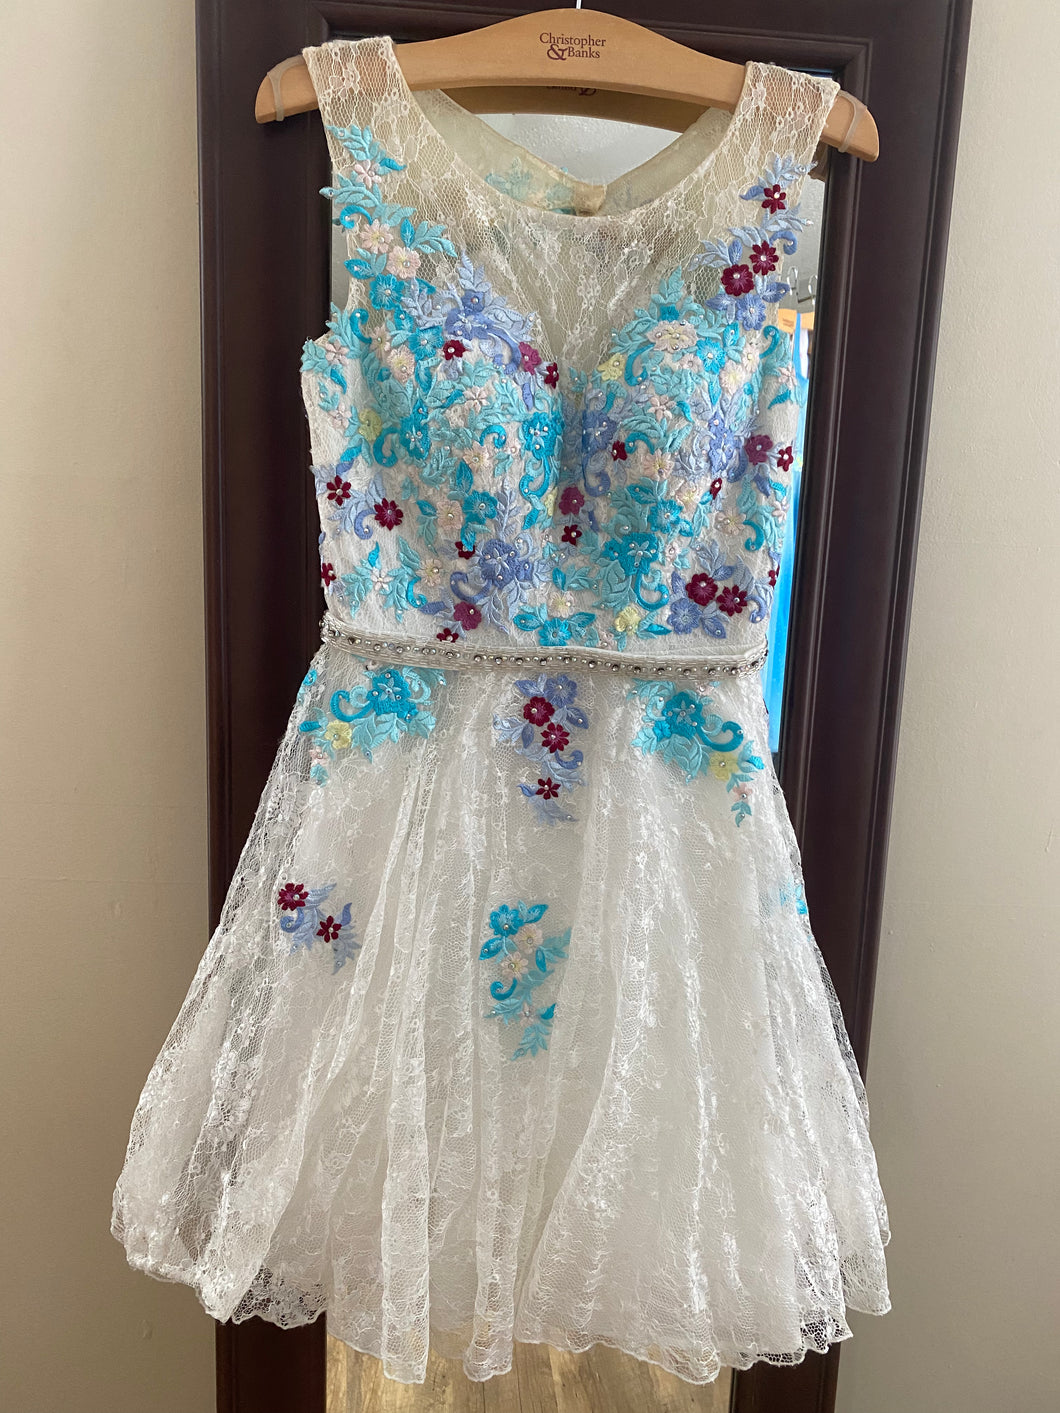 NIEV100-Q Short White Floral Formal Gown. Size 6